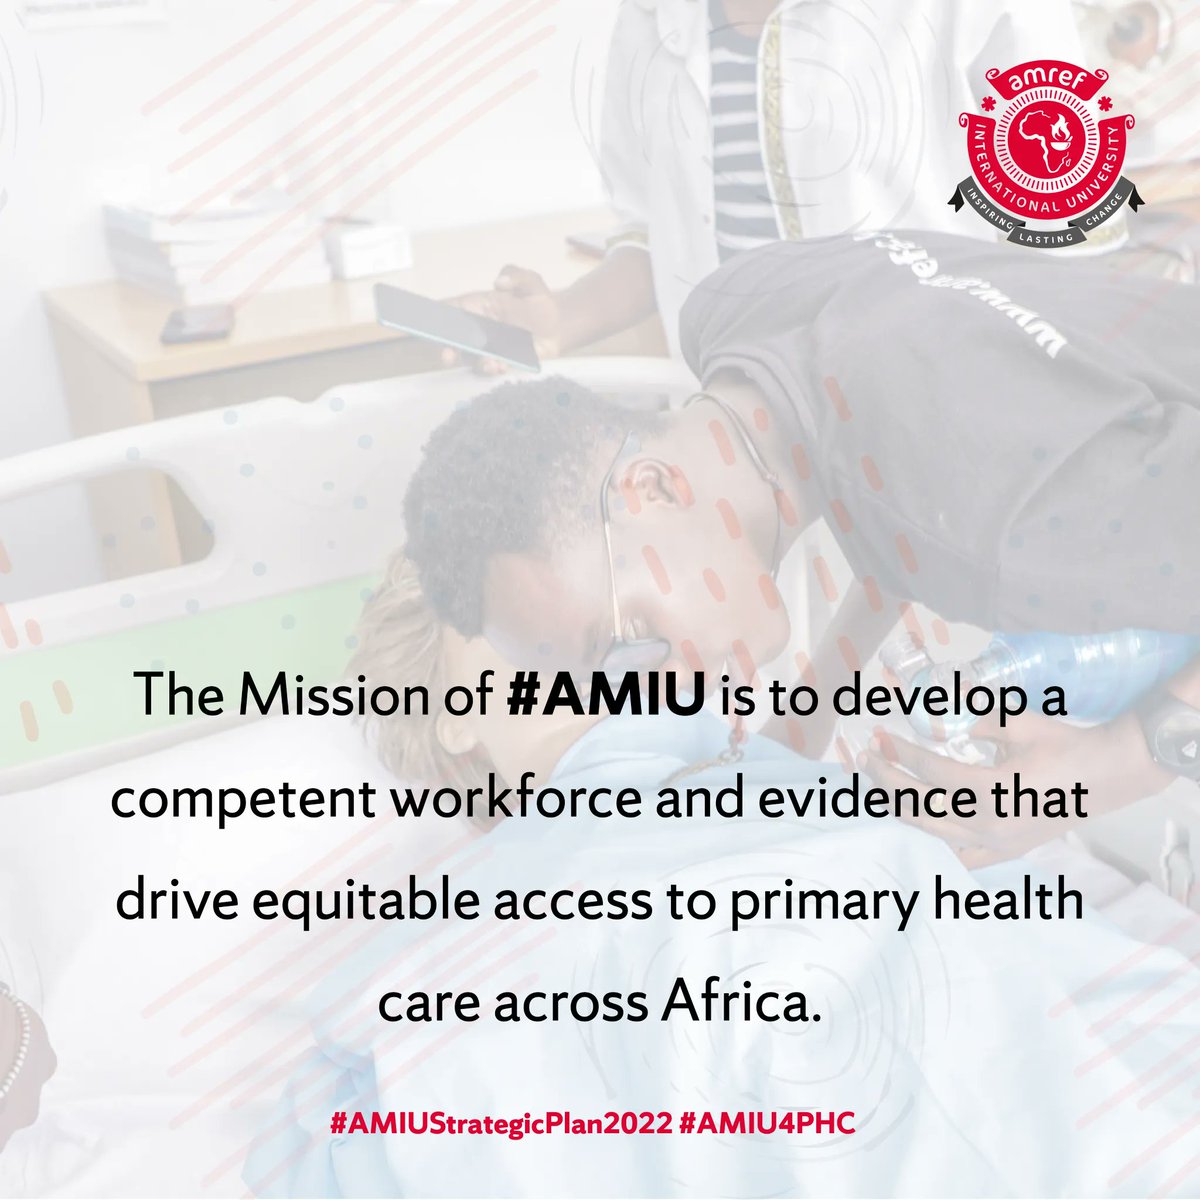 The Mission of @AmrefUniversity is to develop a competent workforce that drive #equitableaccess to #primaryhealthcare across #Africa.
#AMIUStrategicPlan2022
#AMIU4PHC

Learn more at buff.ly/3uRBdmO
Contact: +254 741 743 871